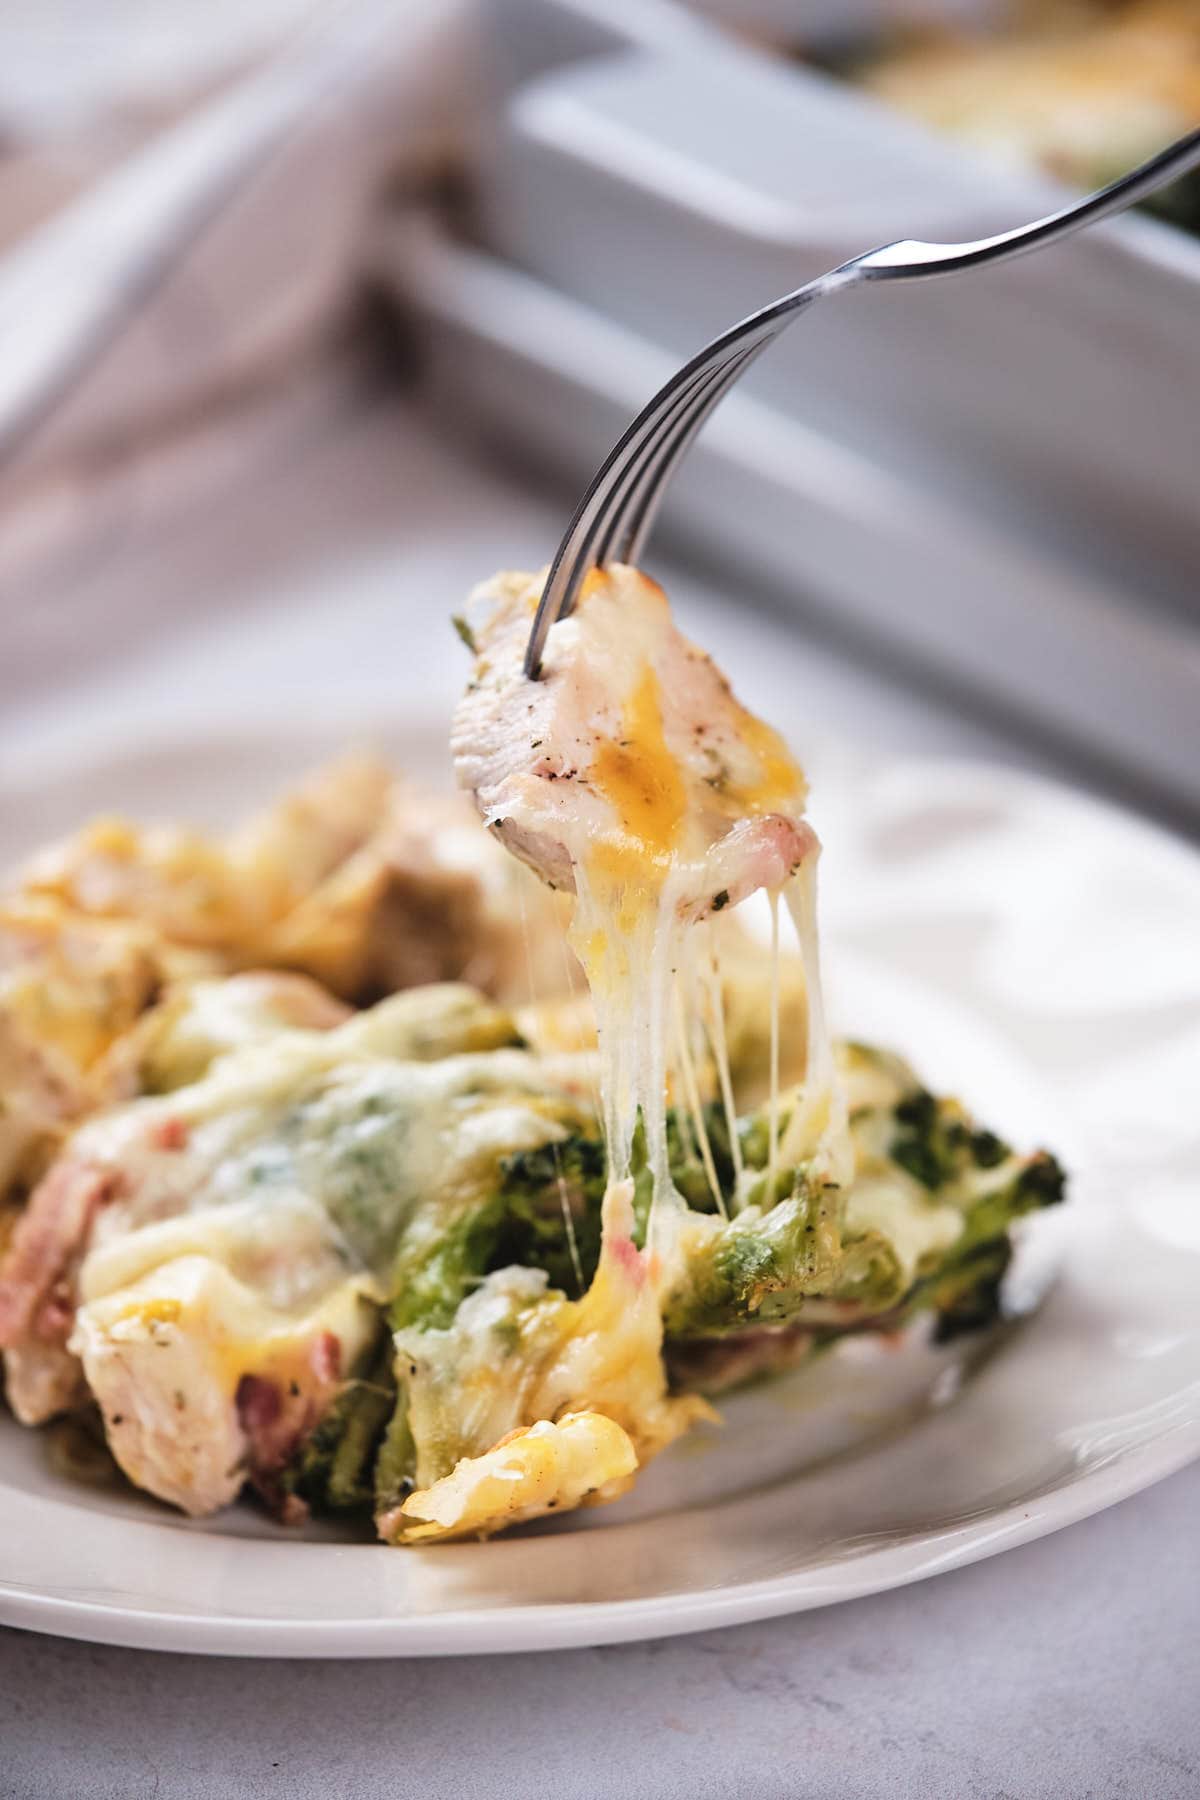 A fork lifting a cheesy bite of broccoli and chicken casserole from a plate.